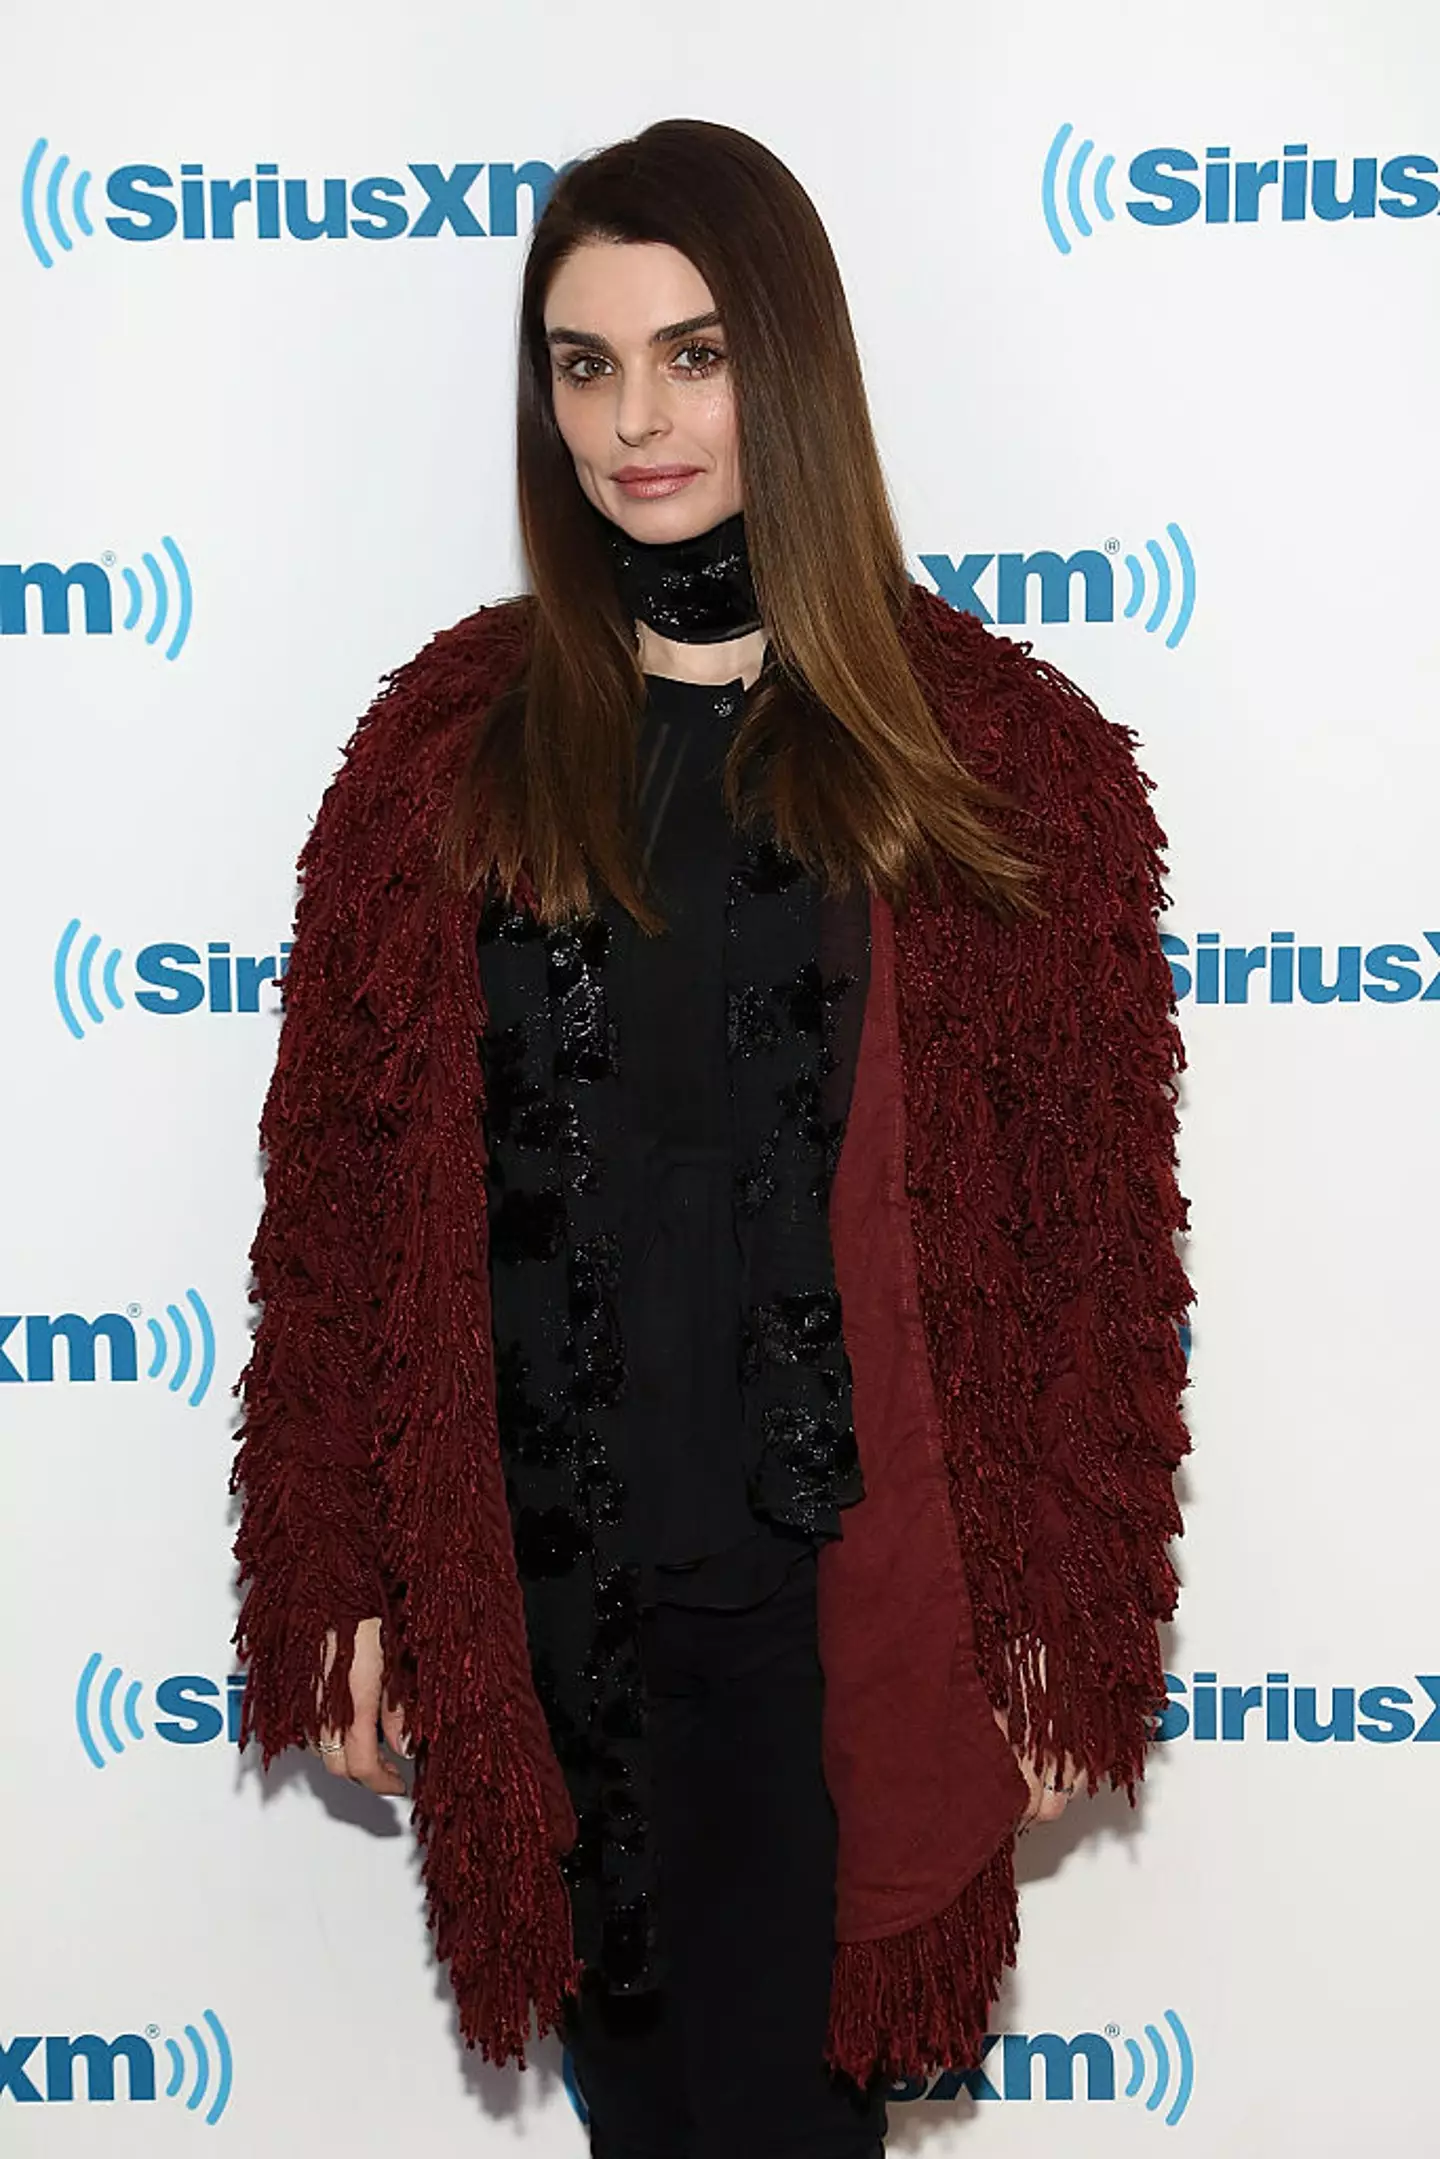 Aimee Osbourne has pursued a music career since choosing not to be on 'The Osbournes'.